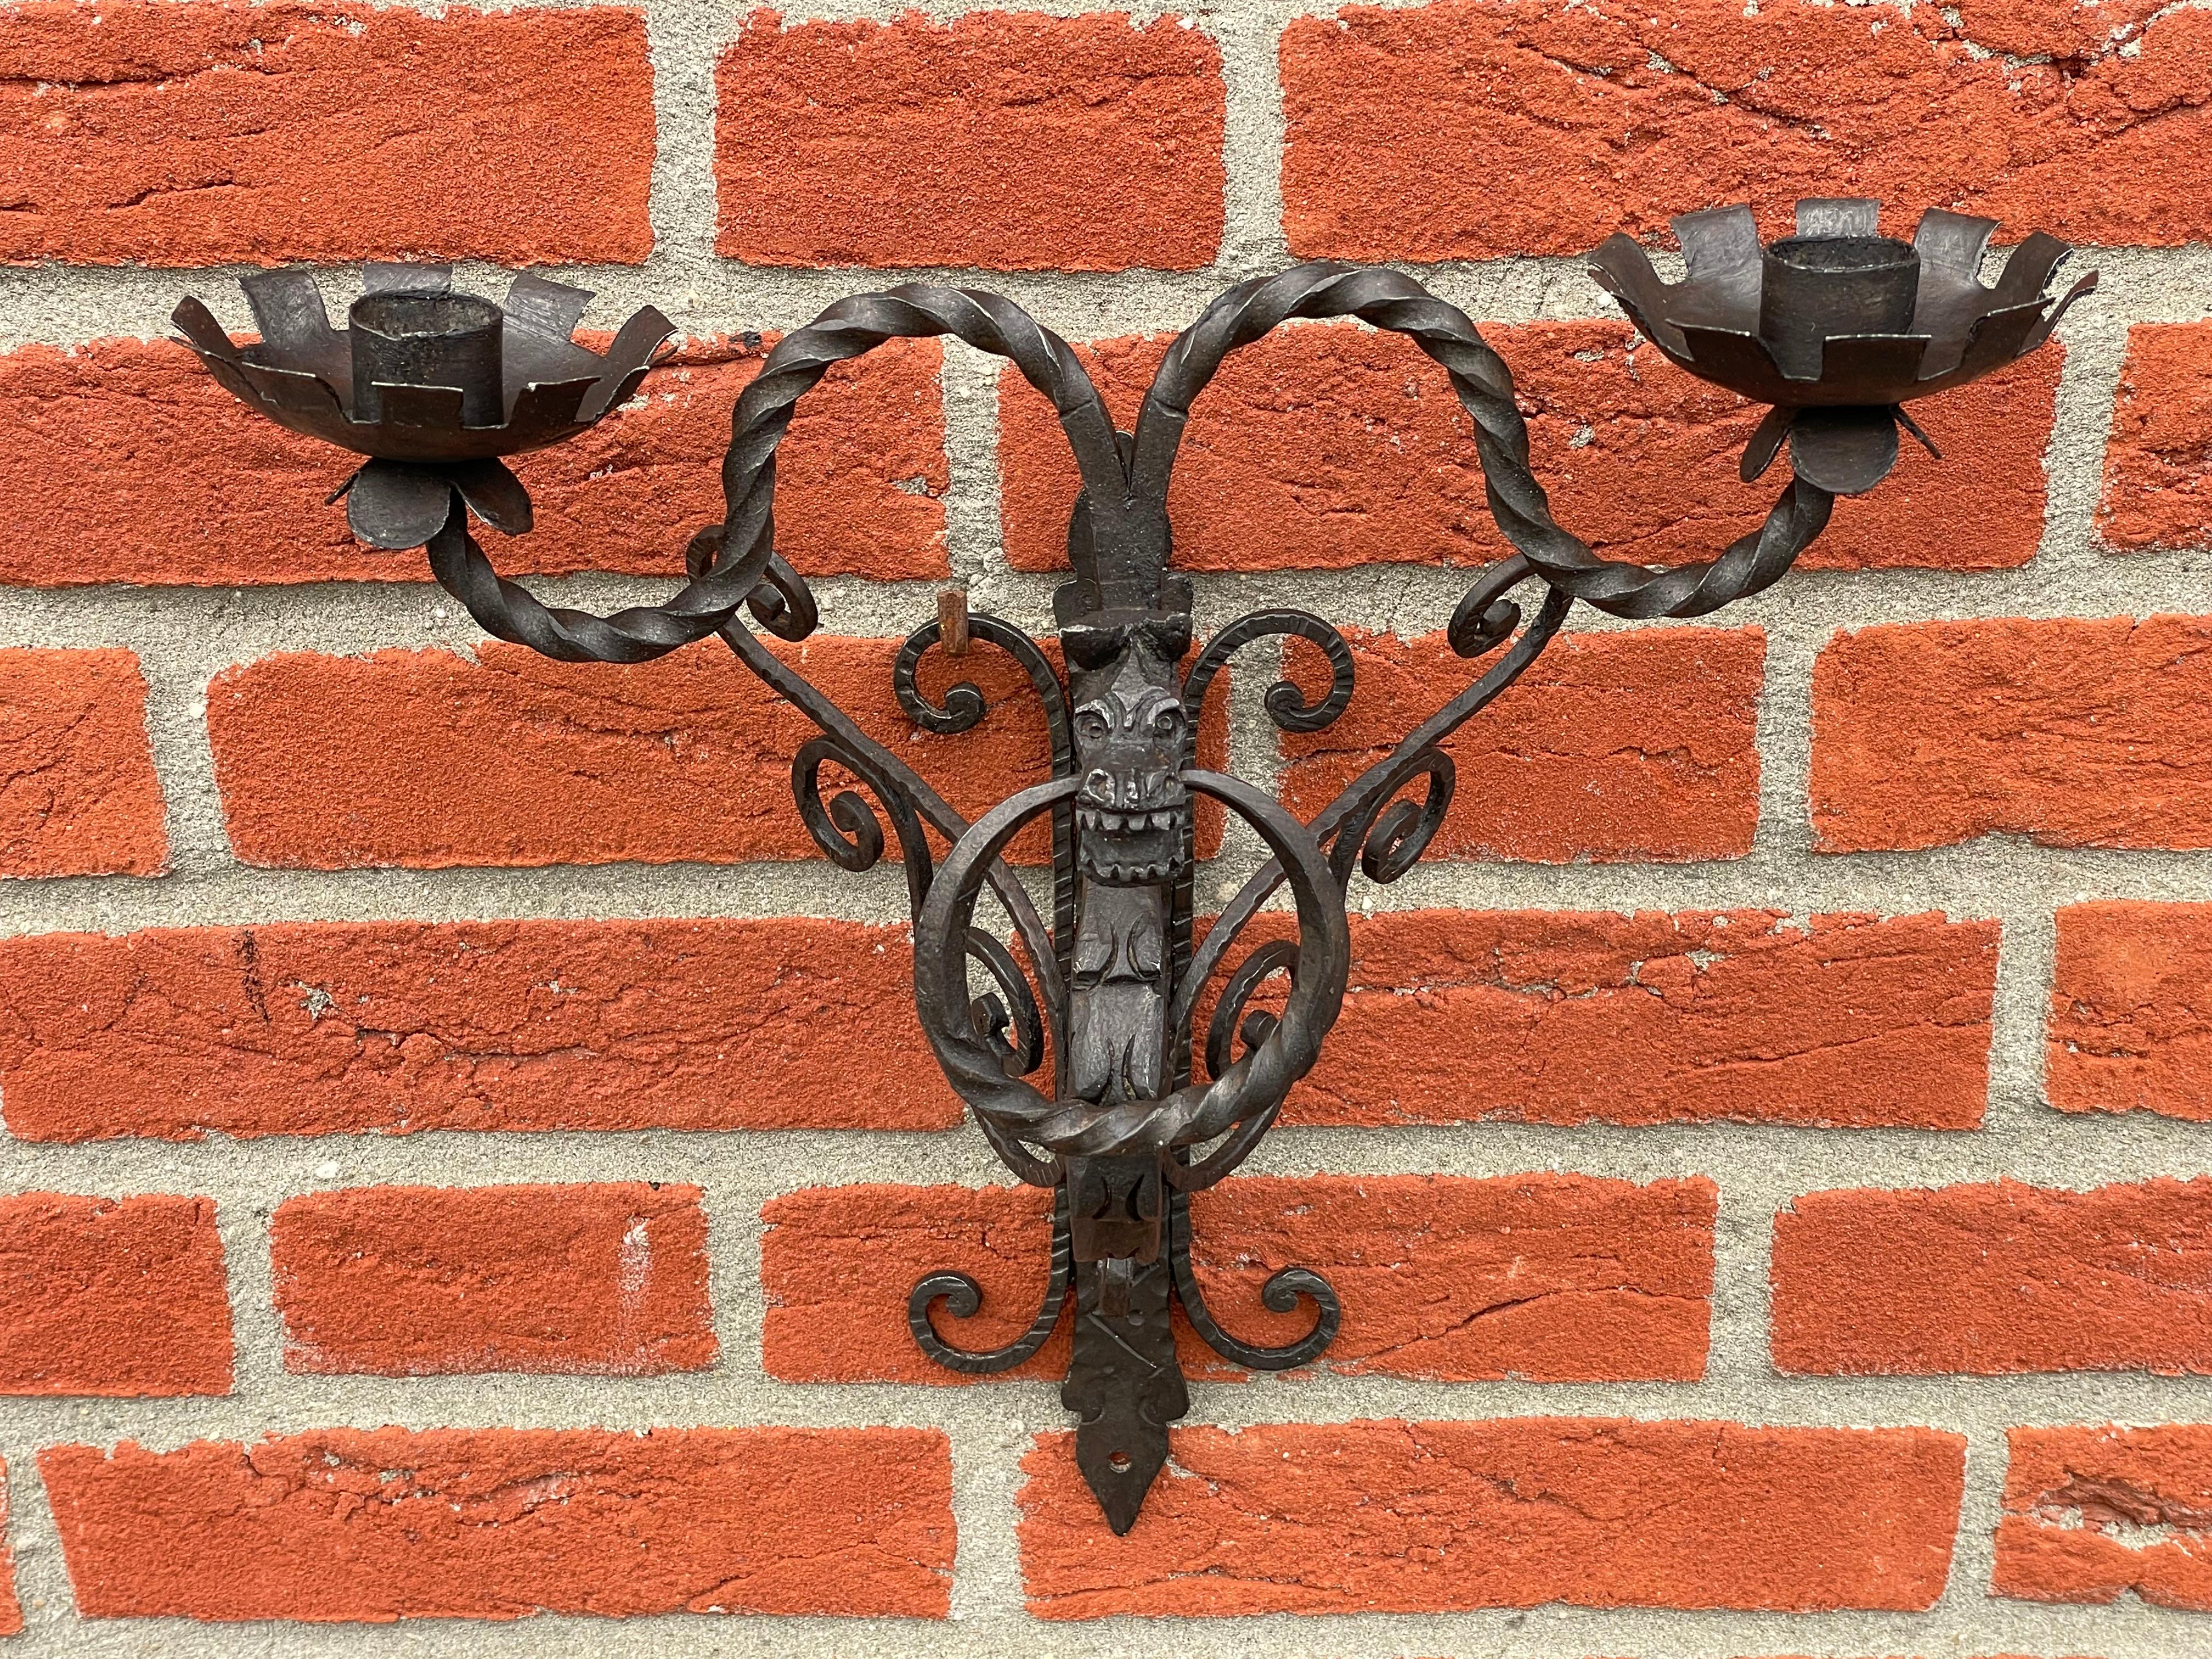 Rare Set of 7 Antique Wrought Iron Gothic Revival Dragon Sculpture Wall Sconces For Sale 9